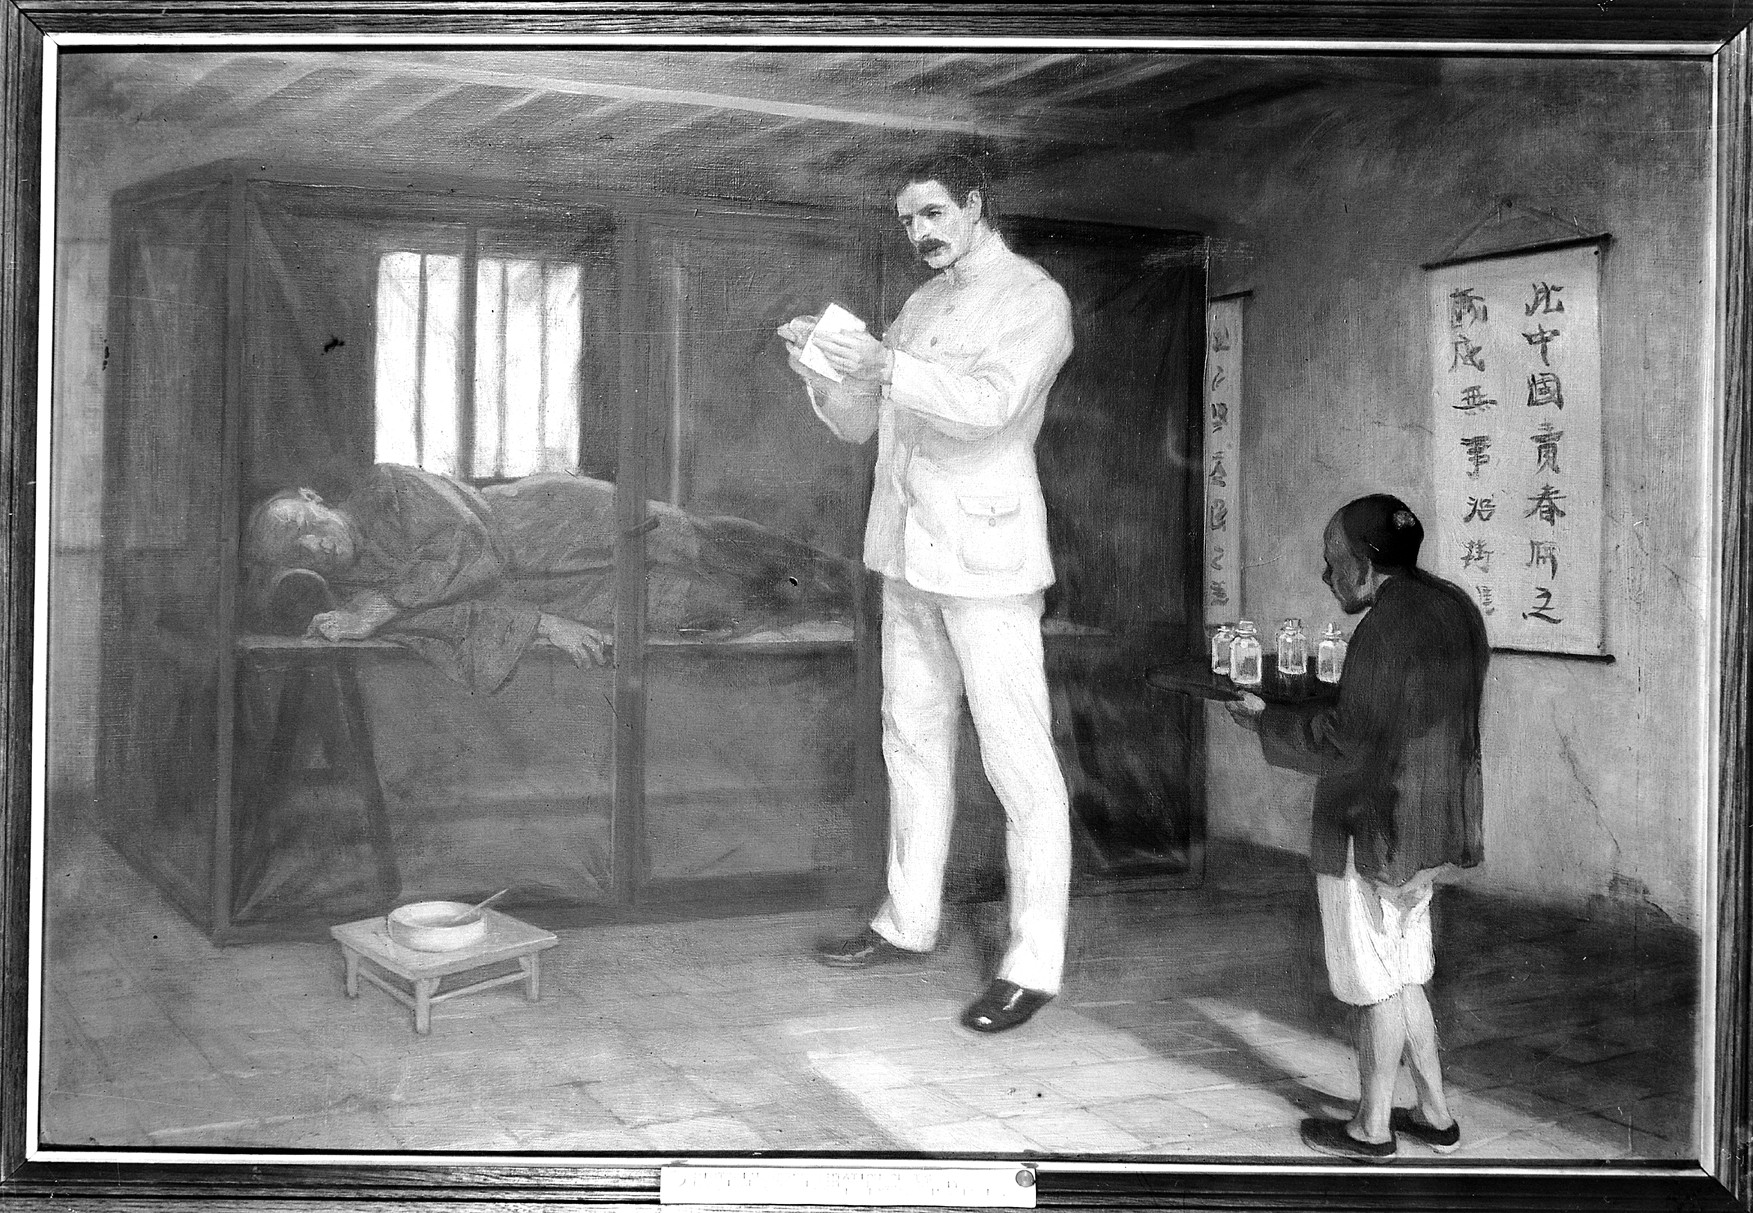 Patrick Manson experimenting with filaria sanguinis-hominis on a human subject in China. Painting by E. Board, ca. 1912. Credit: Wellcome Collection. CC BY